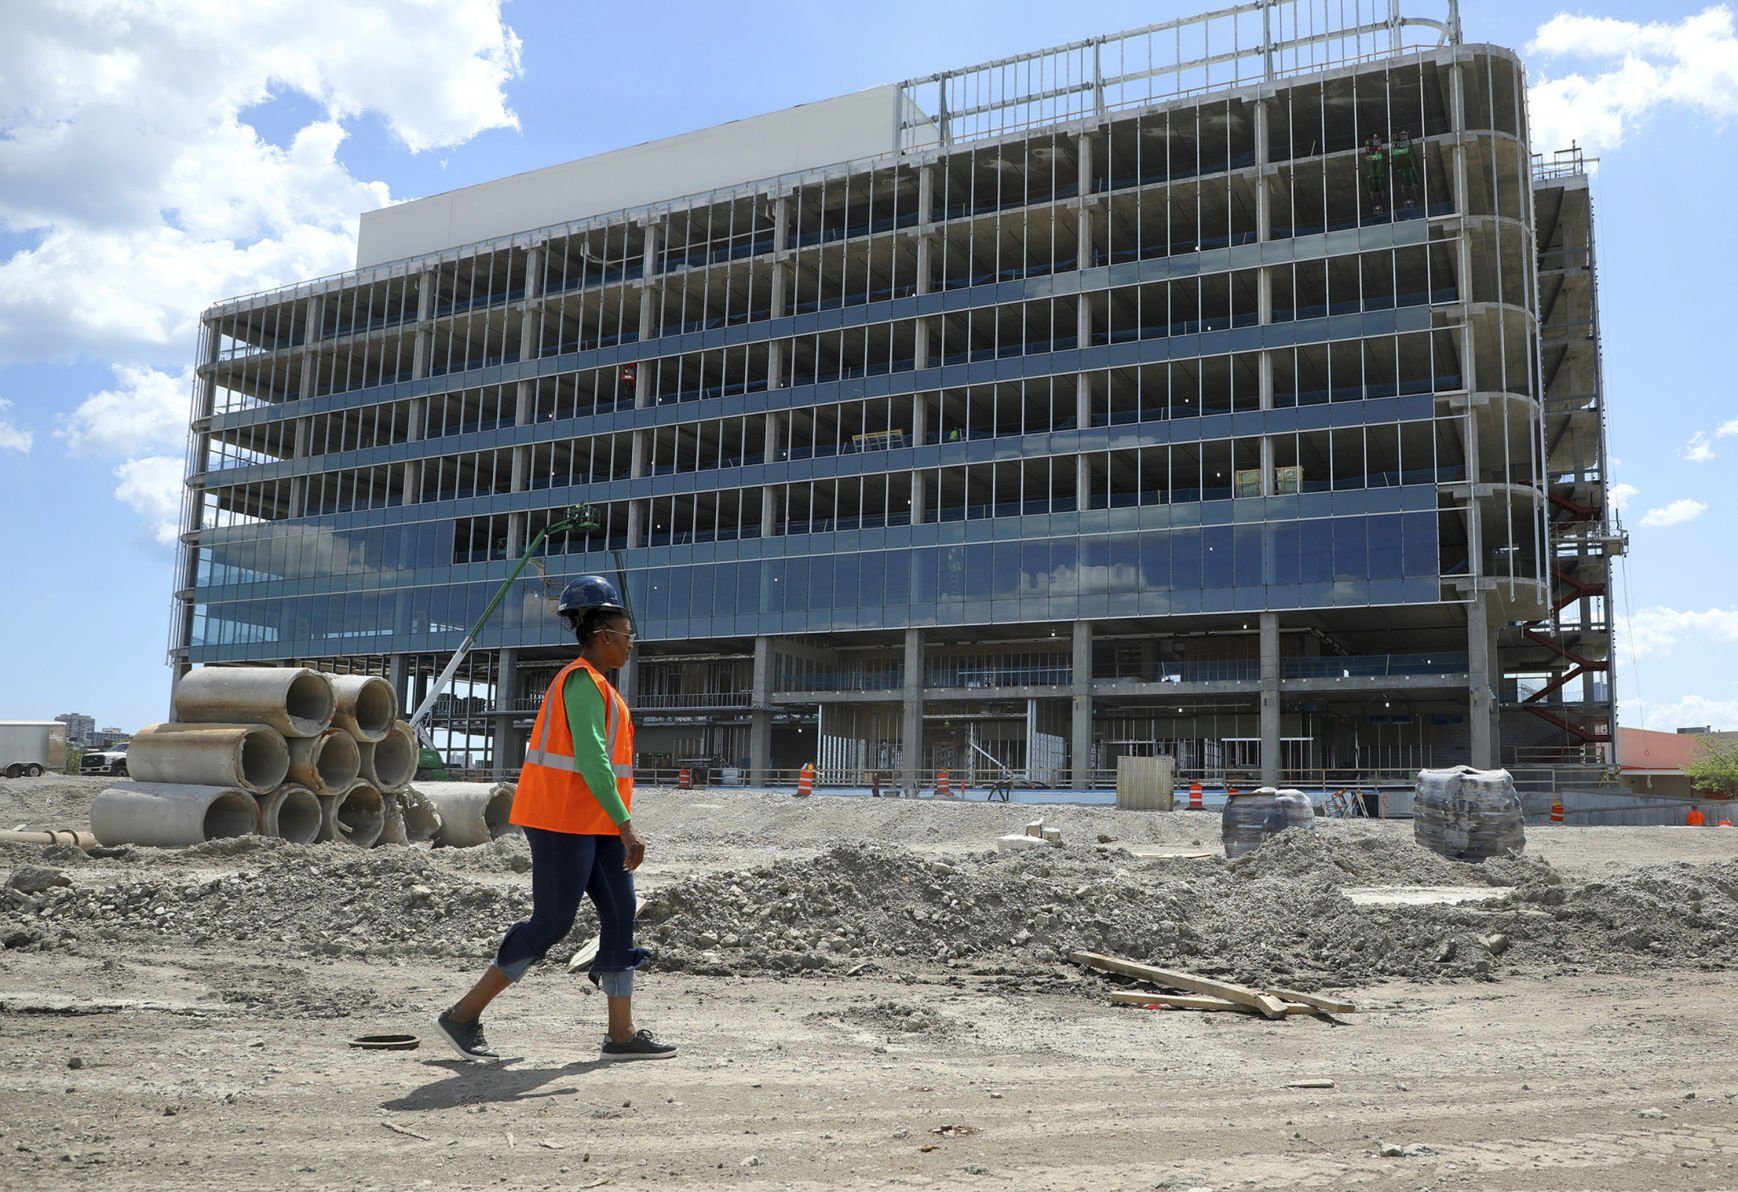 Dr. Suzet McKinney, who leads developer Sterling Bay’s life sciences division, walks in front of the ALLY building at the Lincoln Yards site. Several Chicago developers are building facilities to promote life sciences work.    PHOTO CREDIT: Tribune News Service